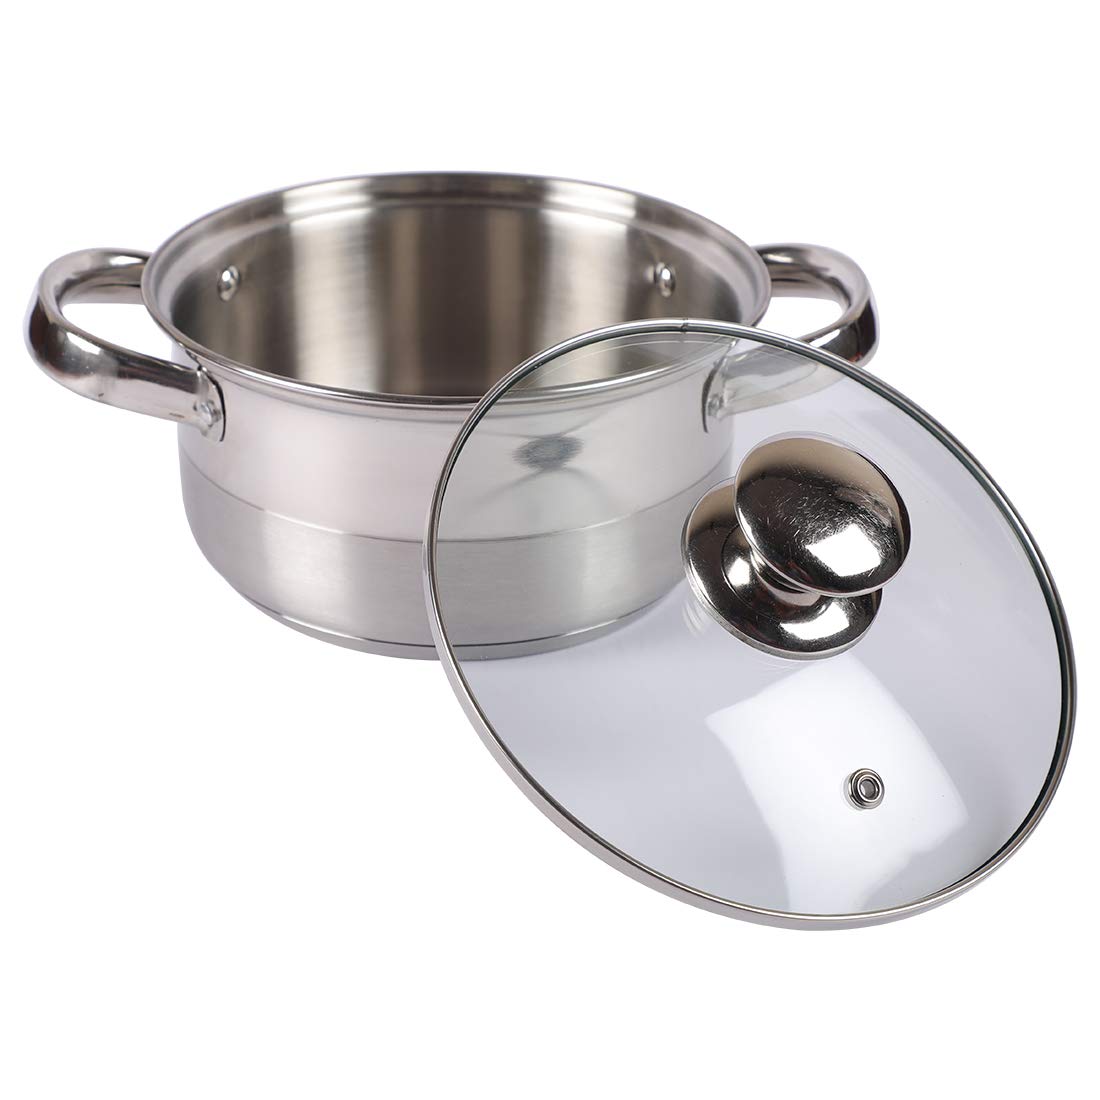 Stainless Steel Dutch Oven With Glass Lid, 1.5 L